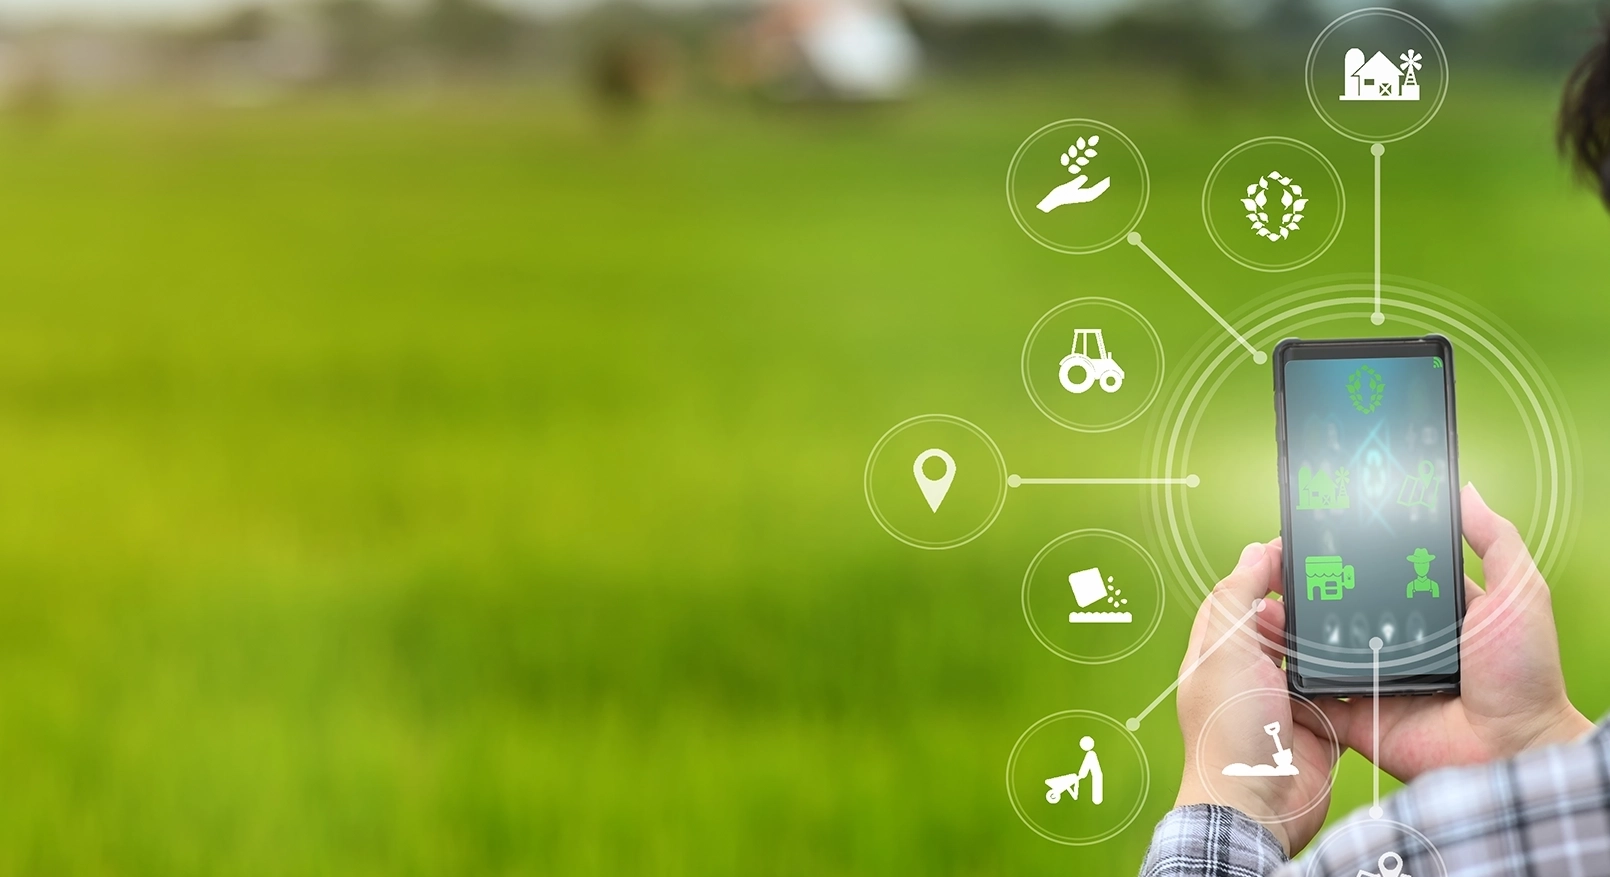 smart agricultural technologies provide numerous advantages for modern agriculture